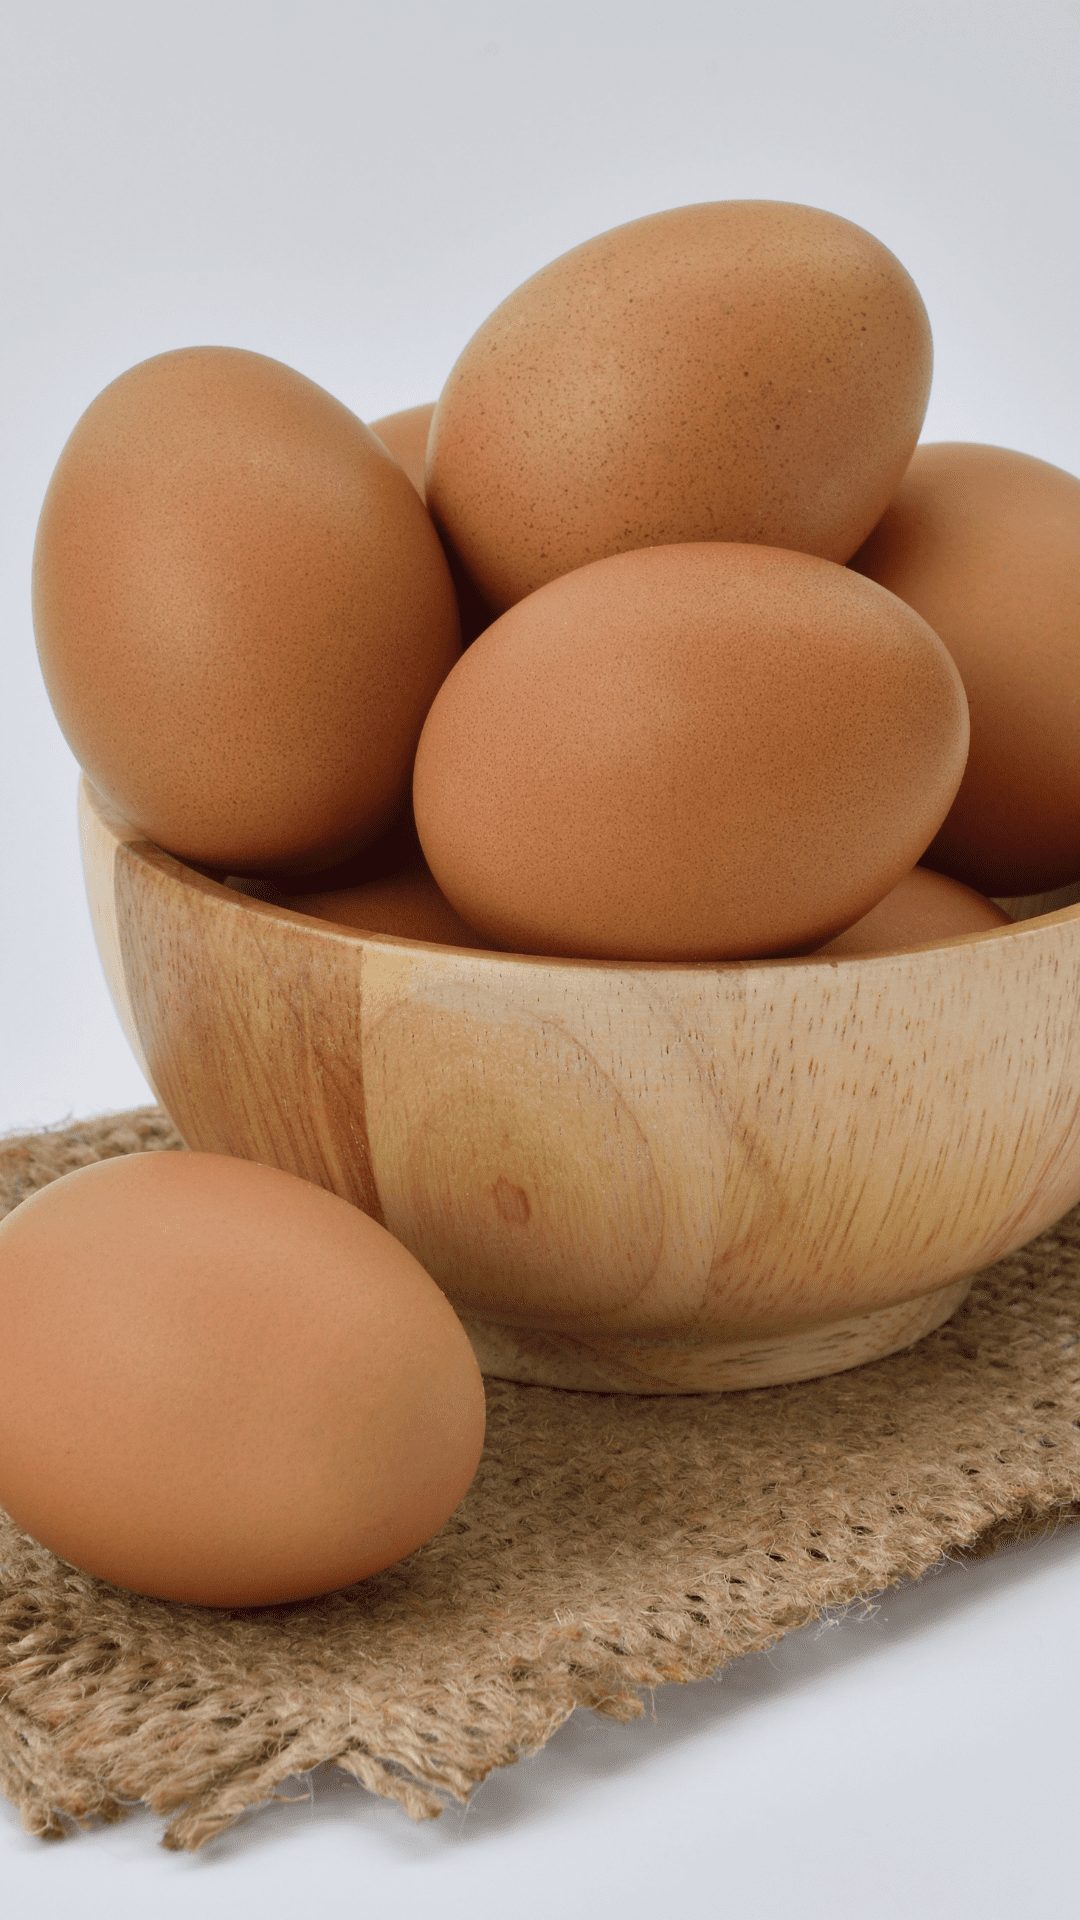 Eating eggs is recommended for the health of your transplant  